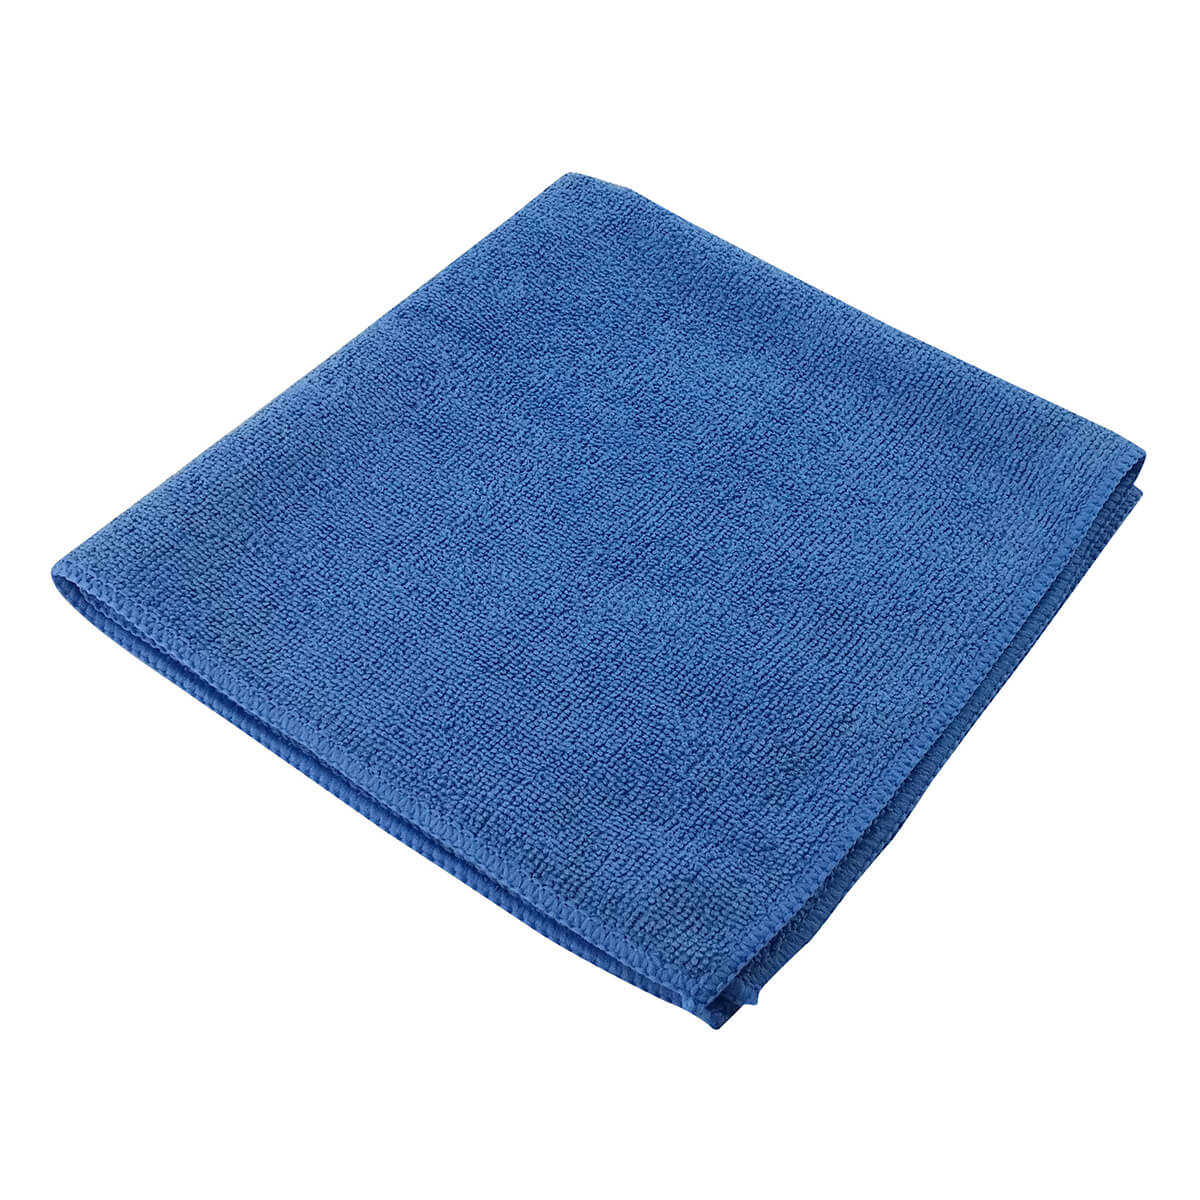 Microfibre Cloths - 14-in x 14-in - Blue - 10 pack